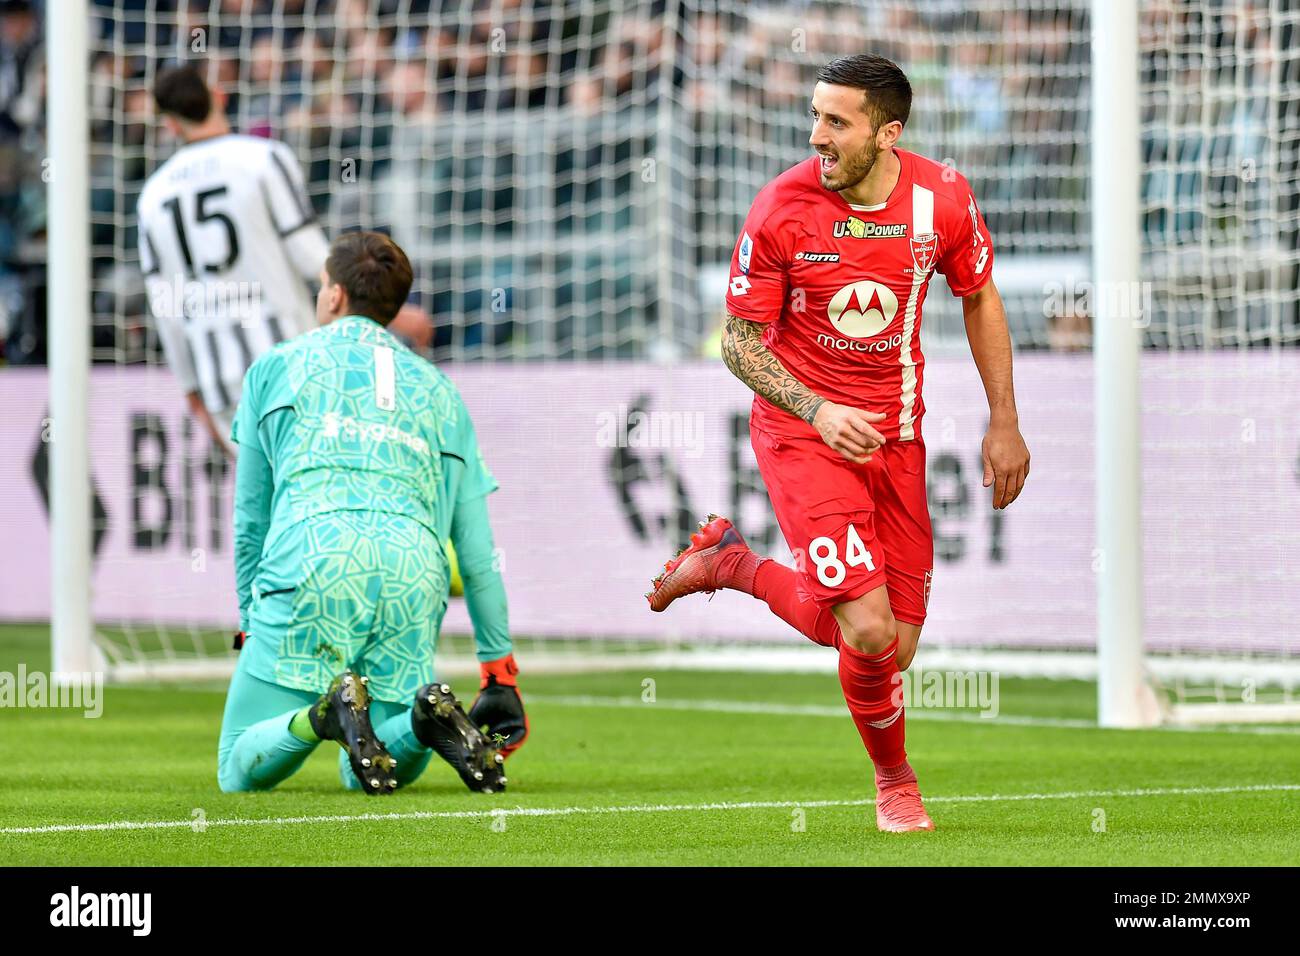 Patrick Ciurria of AC Monza celebrates after past Wojciech Szczesny of Juventus FC and scored the goal of 0-1 during the Serie A football match betwee Stock Photo